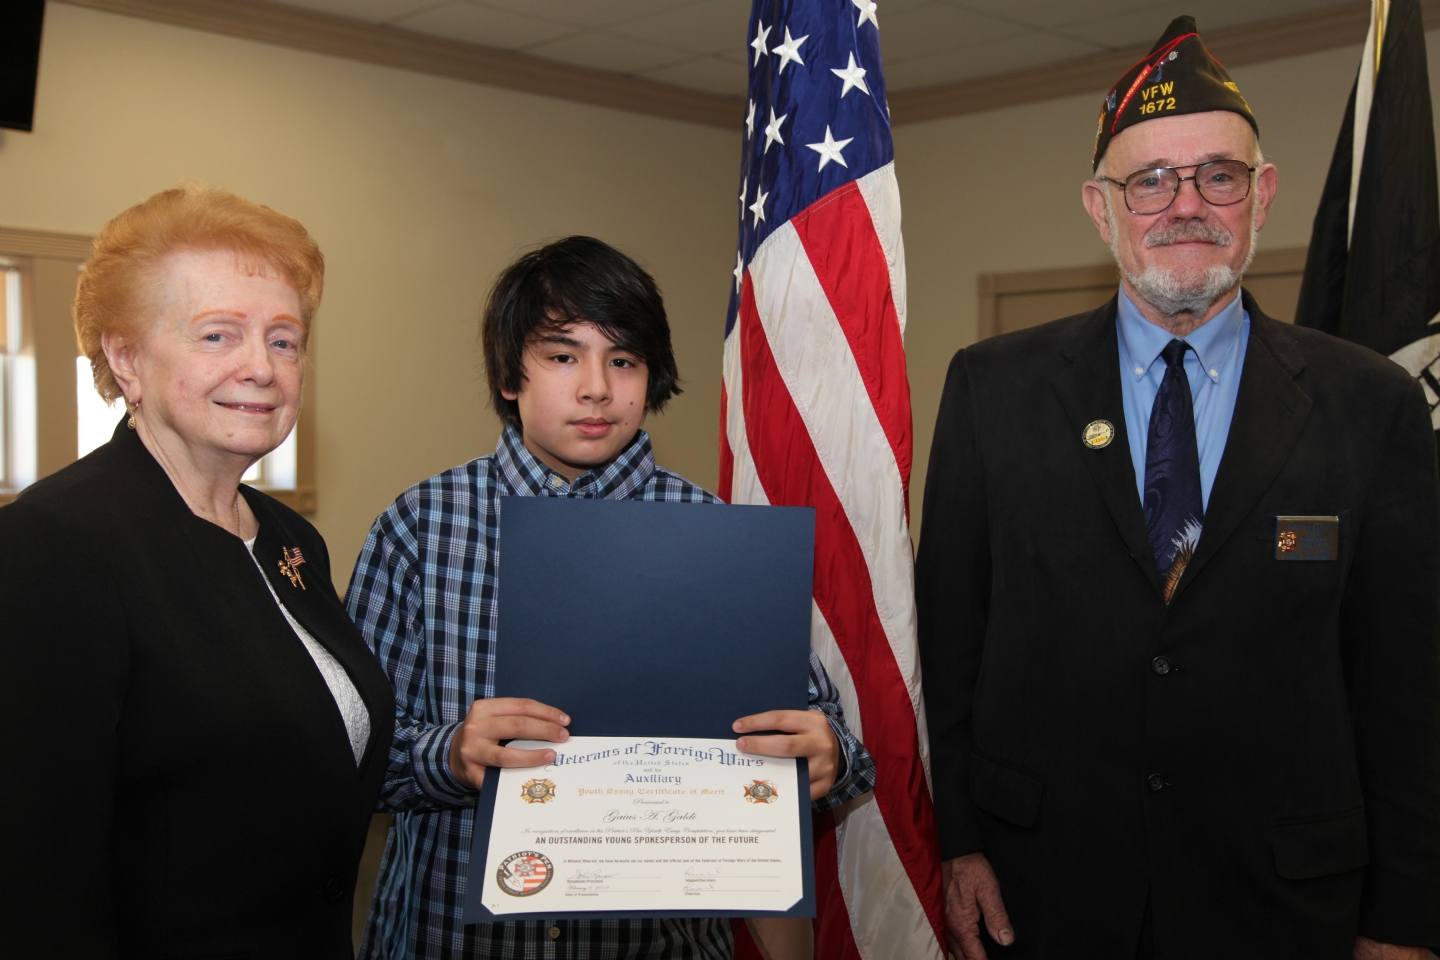 Gaius A.Galdi, 7th grader at King Philip Middle School, West Hartford, won Second Place with his essay response to “Why I Honor the American Flag.”